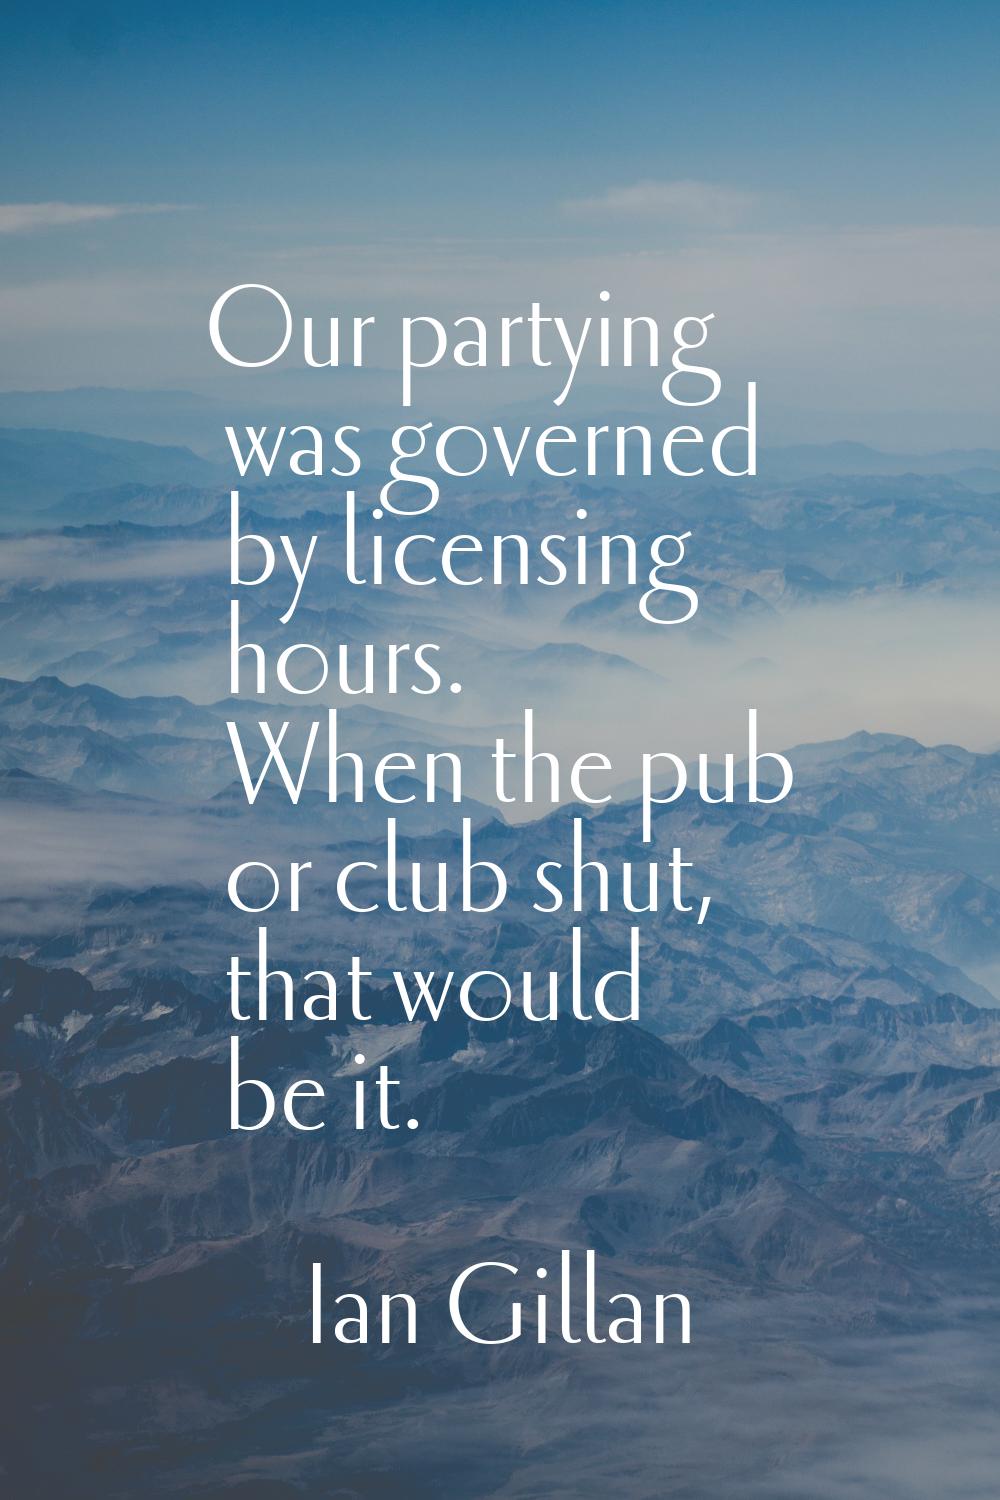 Our partying was governed by licensing hours. When the pub or club shut, that would be it.